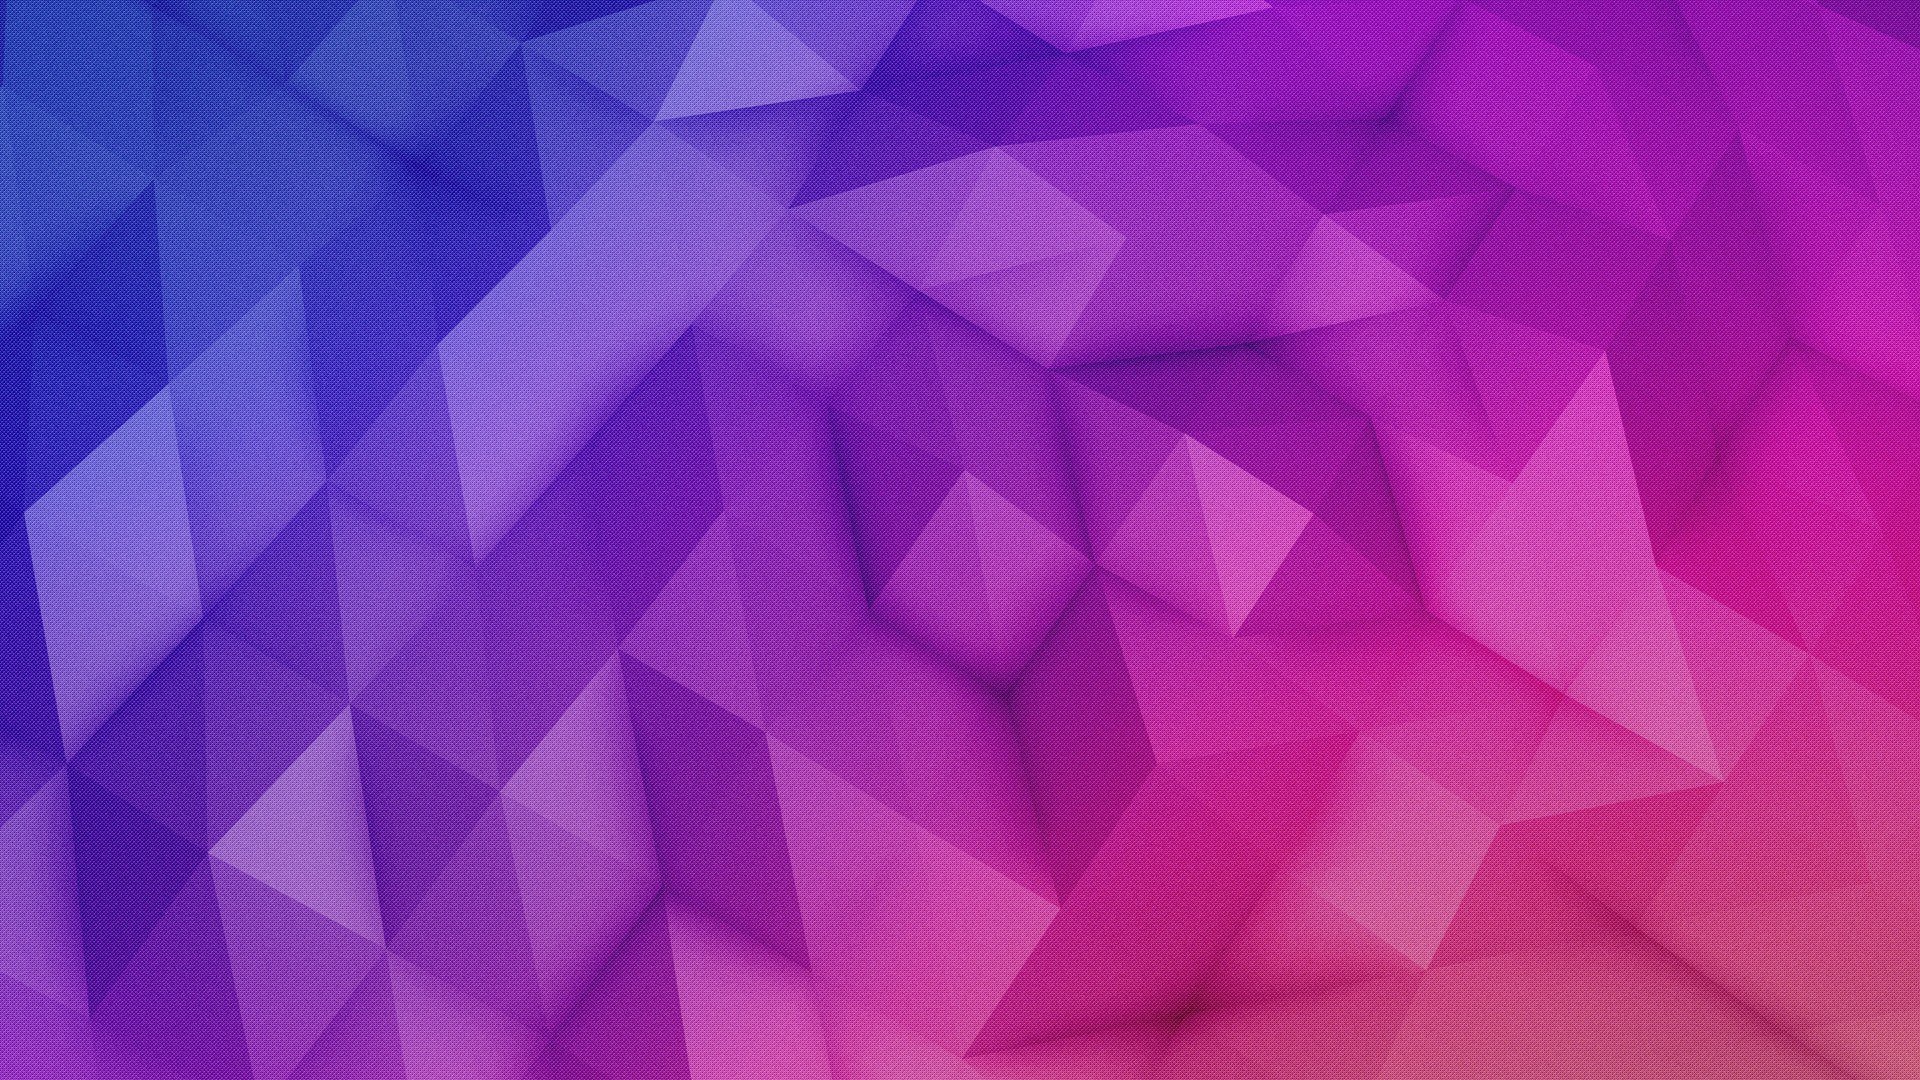 Geometric Background Wallpaper Android Geometry16